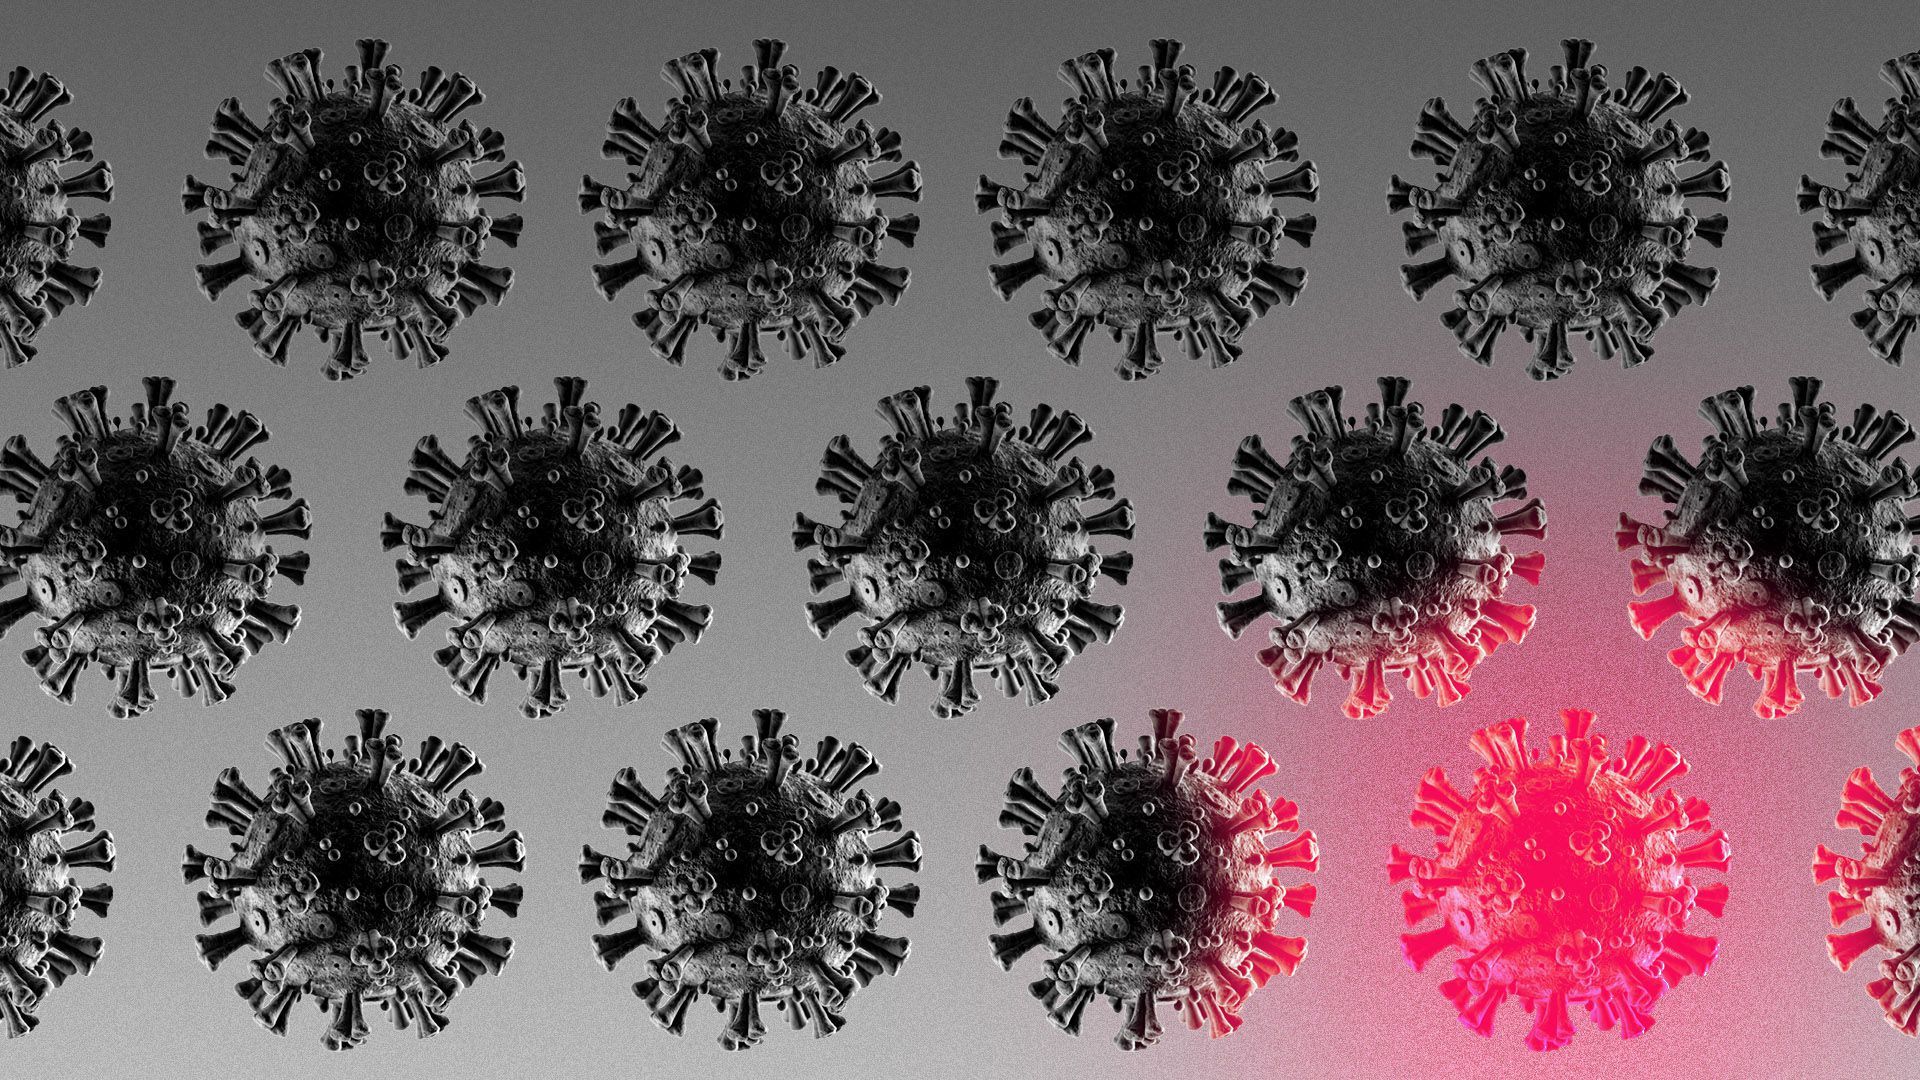 An illustration of coronaviruses in black and red.